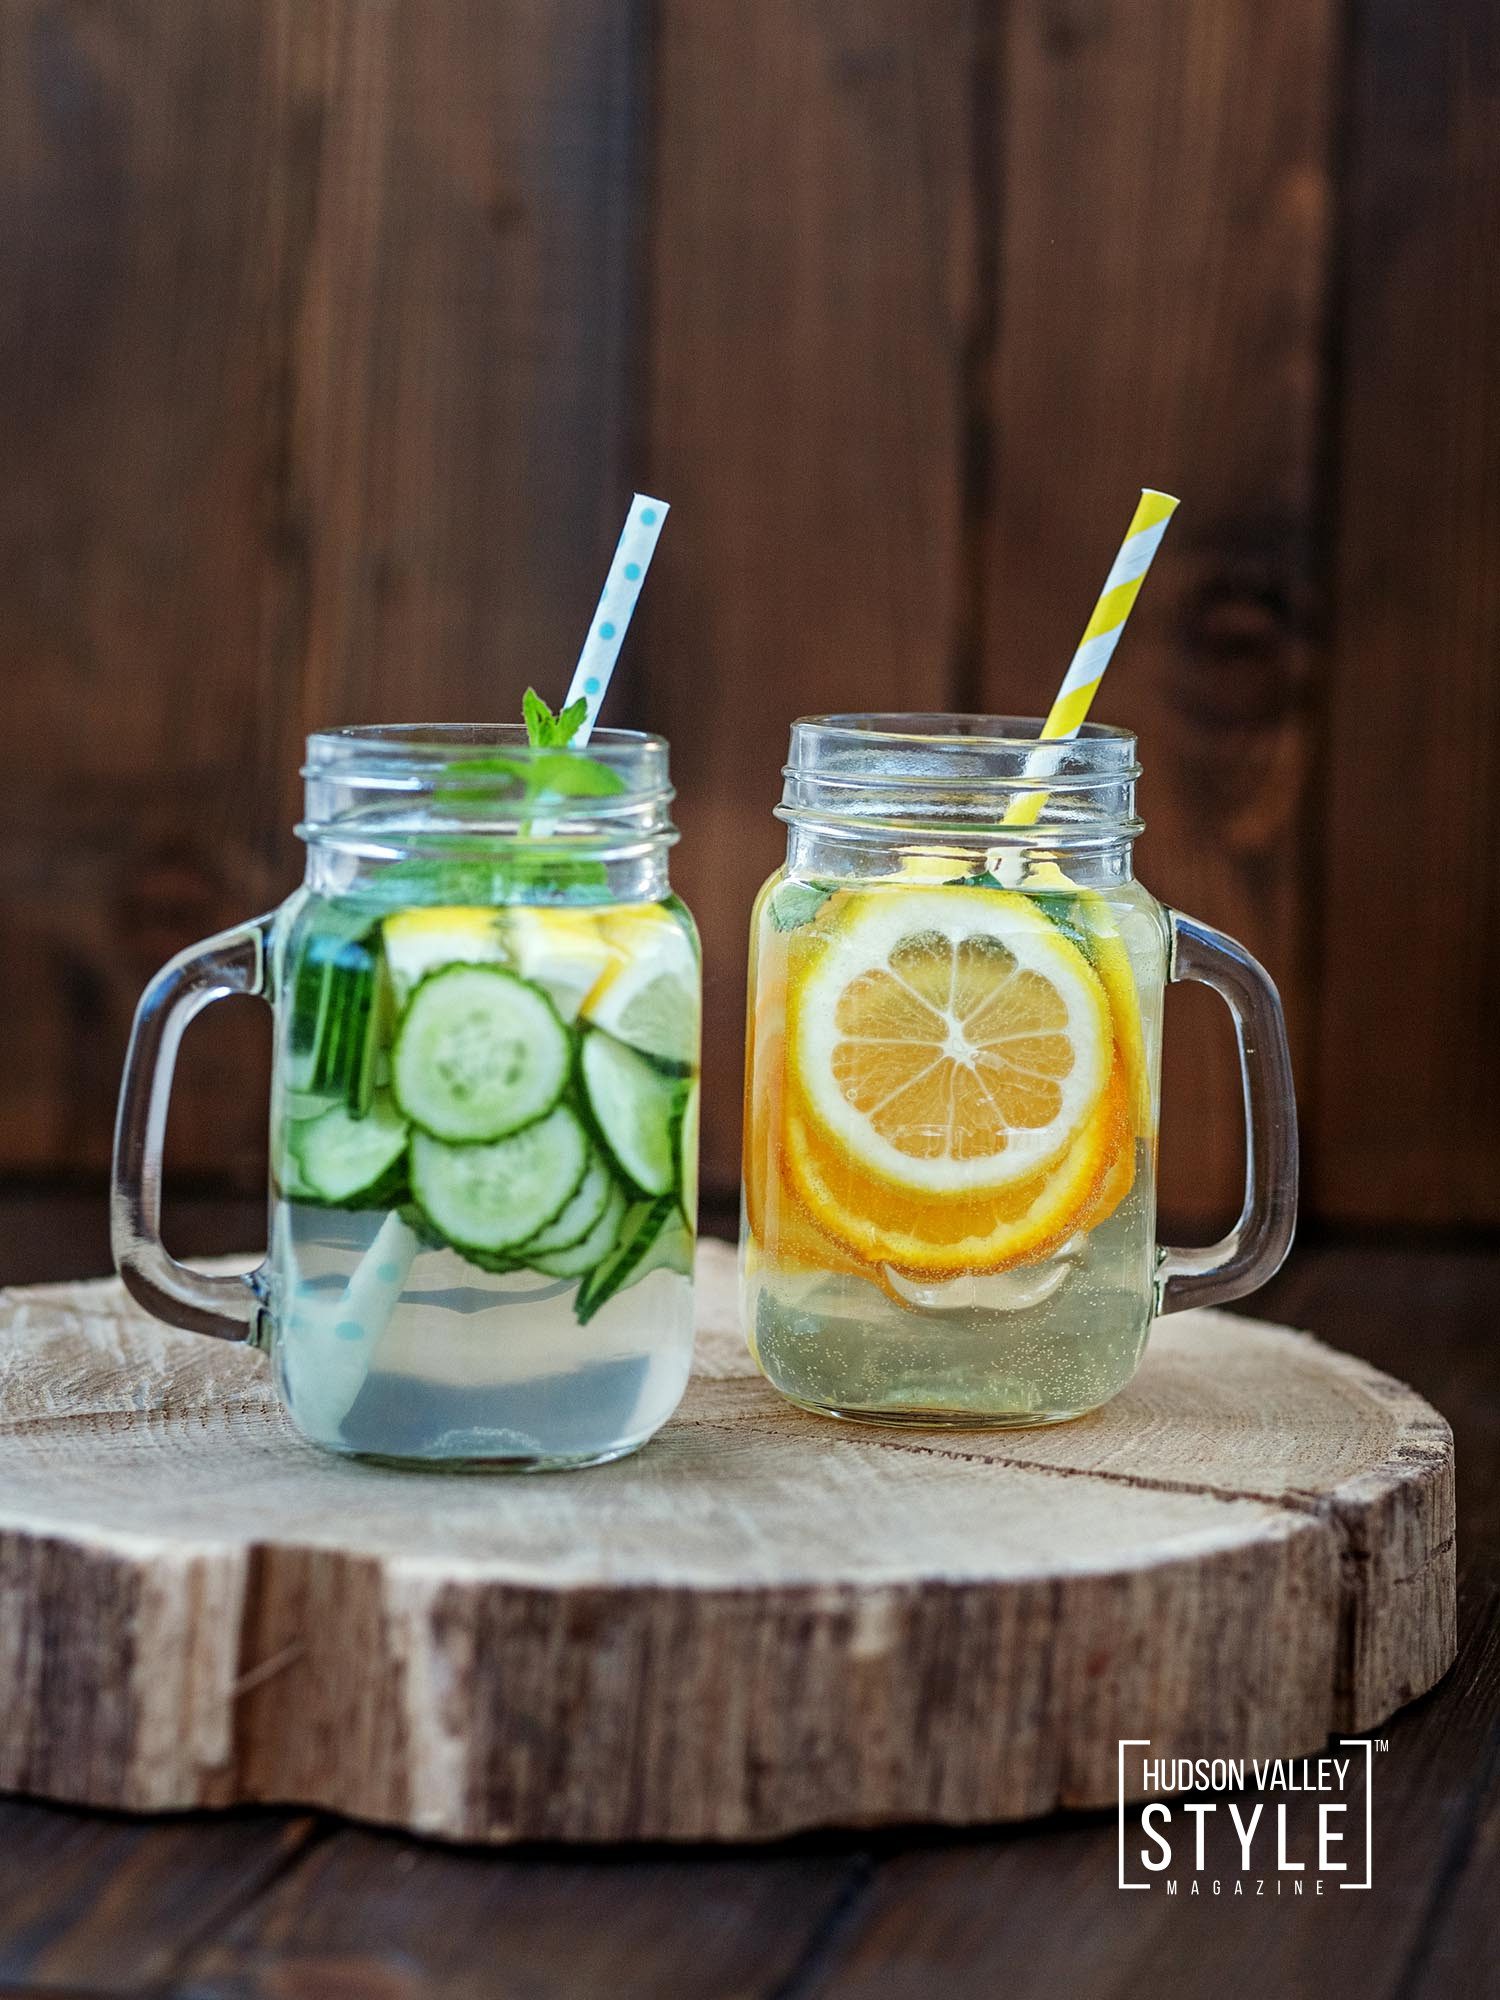 5 Top Benefits of Drinking Lemon Water Every Morning